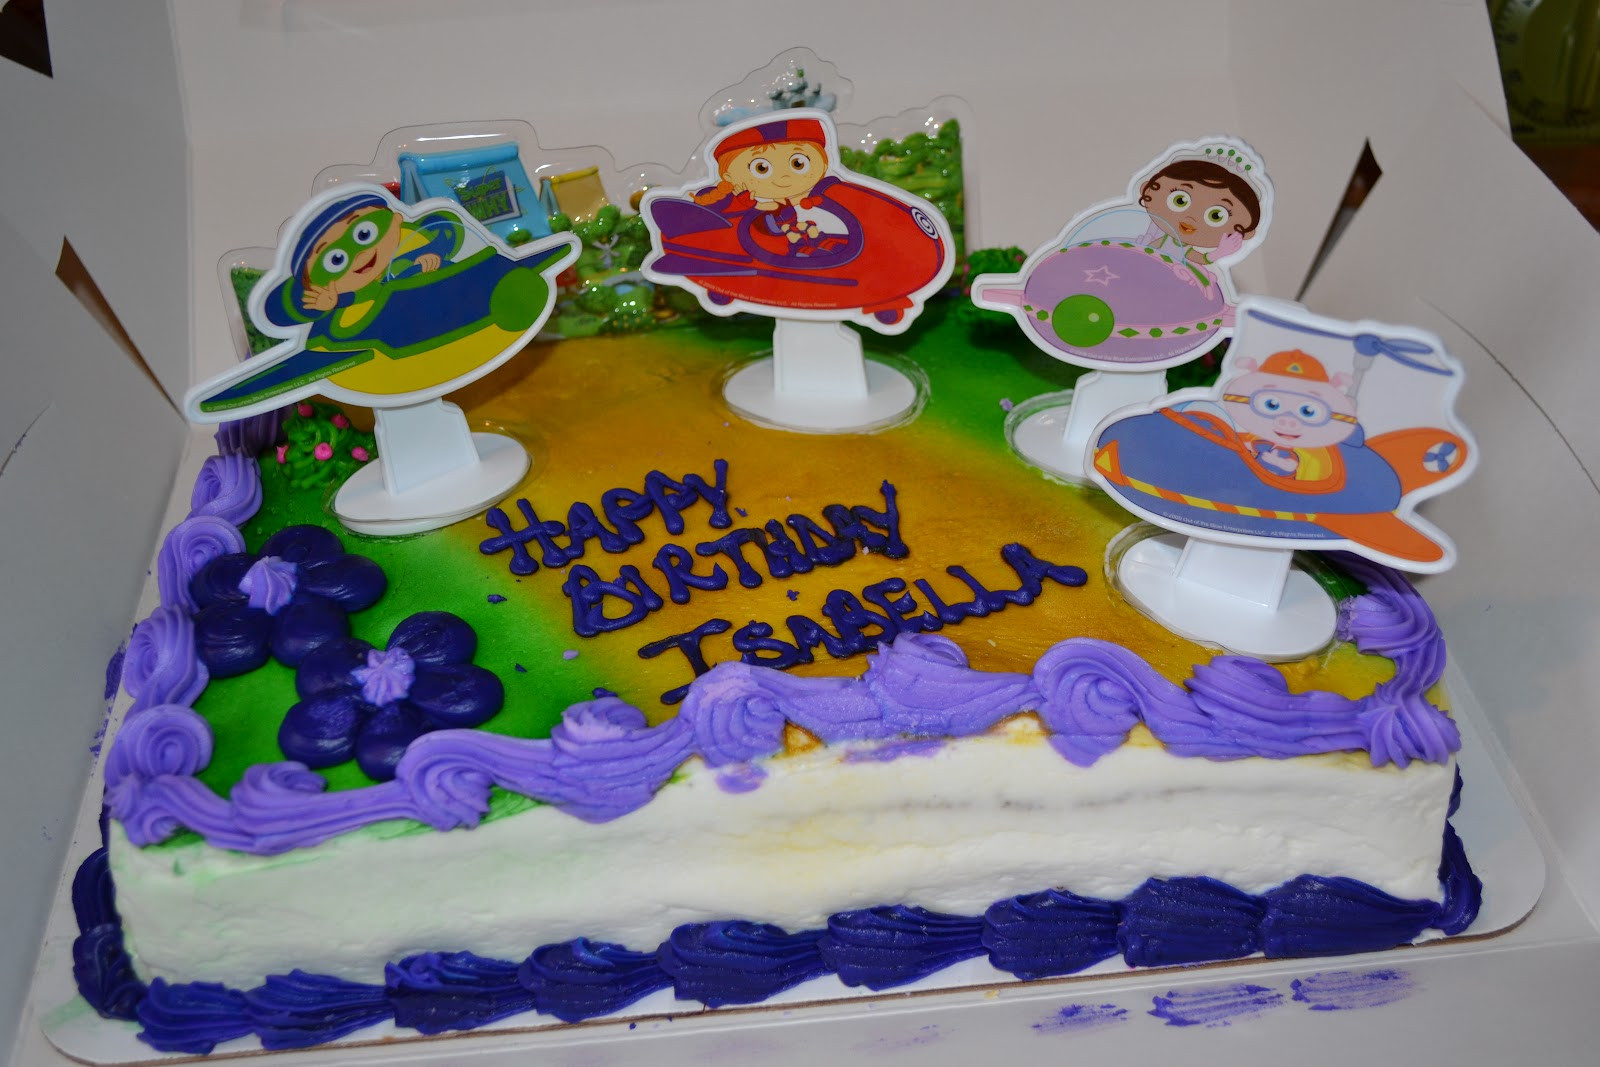 Super Why Birthday Cake
 Mom s Got a Brand New Bag Cupcake s Super Why themed